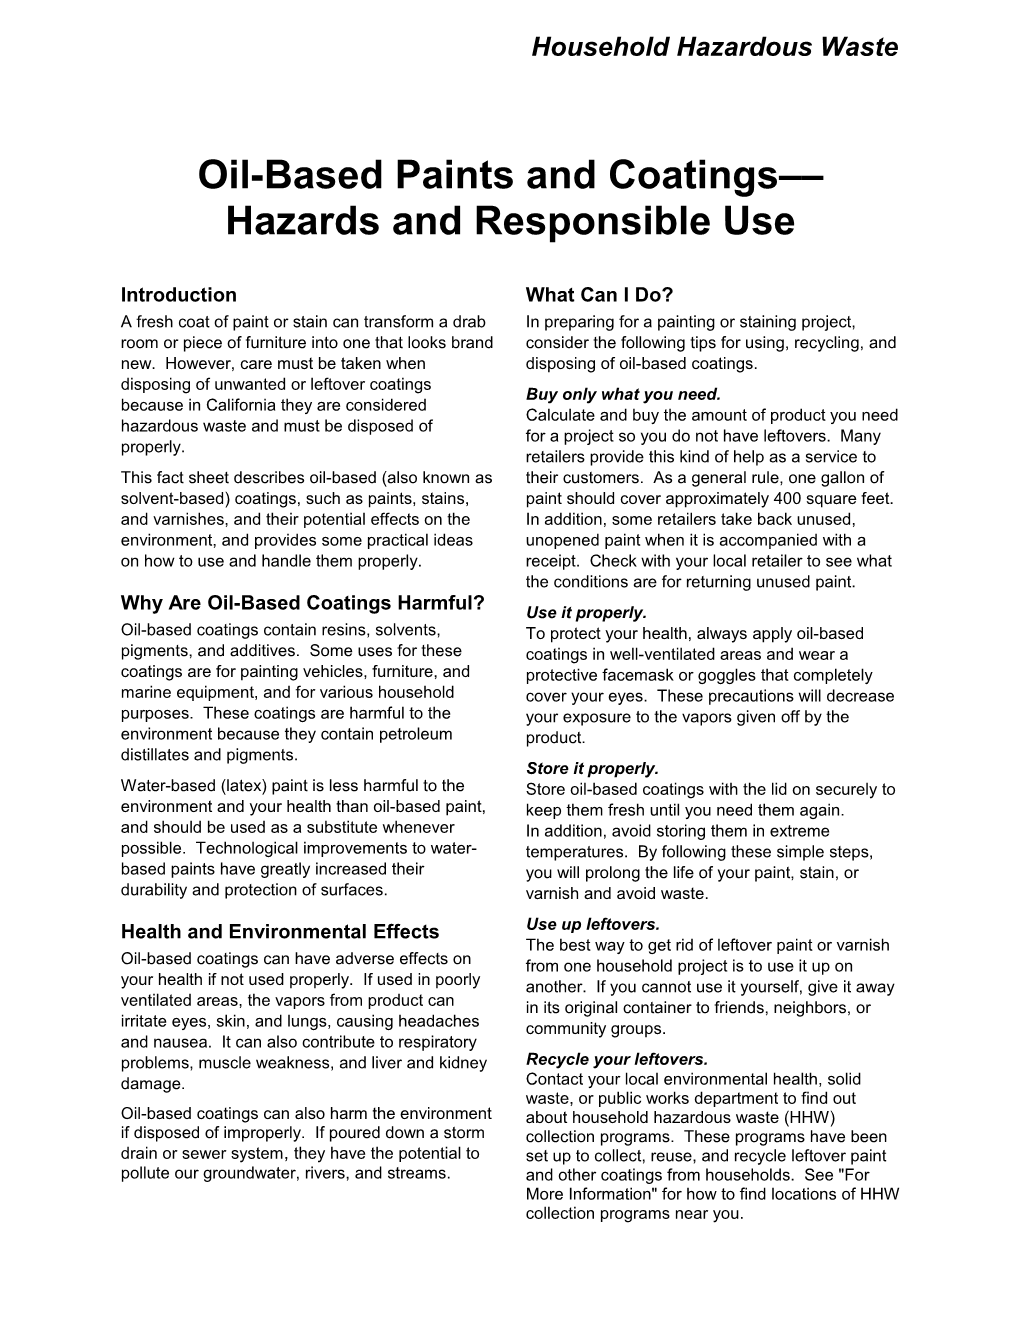 Oil-Based Paints and Coatings Hazards and Responsible Use